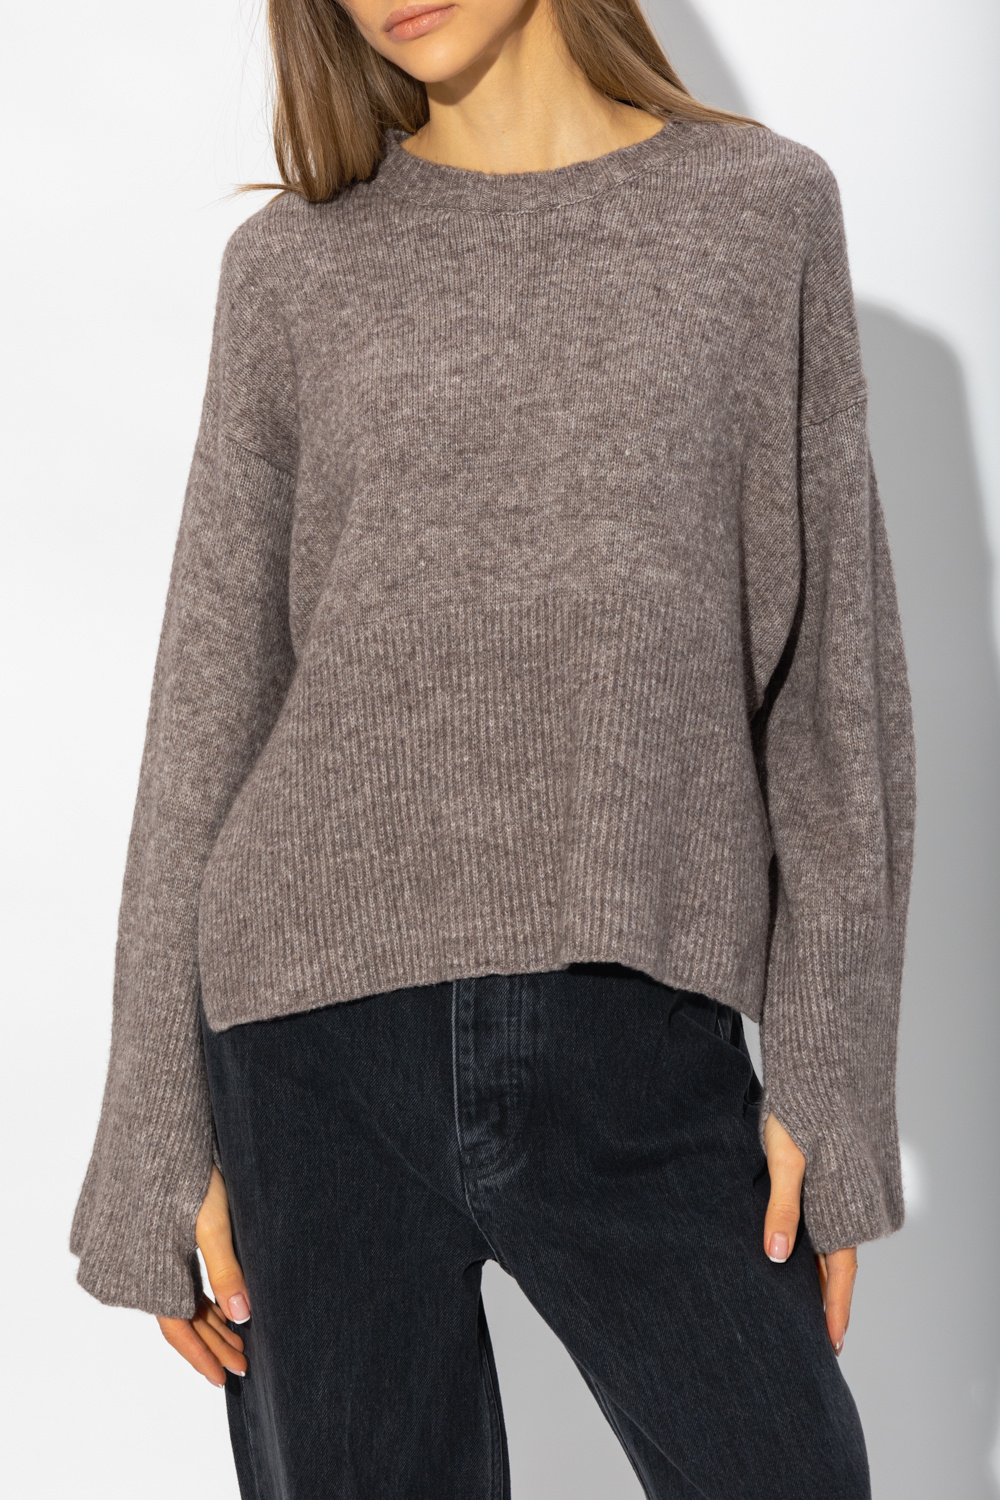 Birgitte Herskind ‘Andres’ sweater Curve with vents